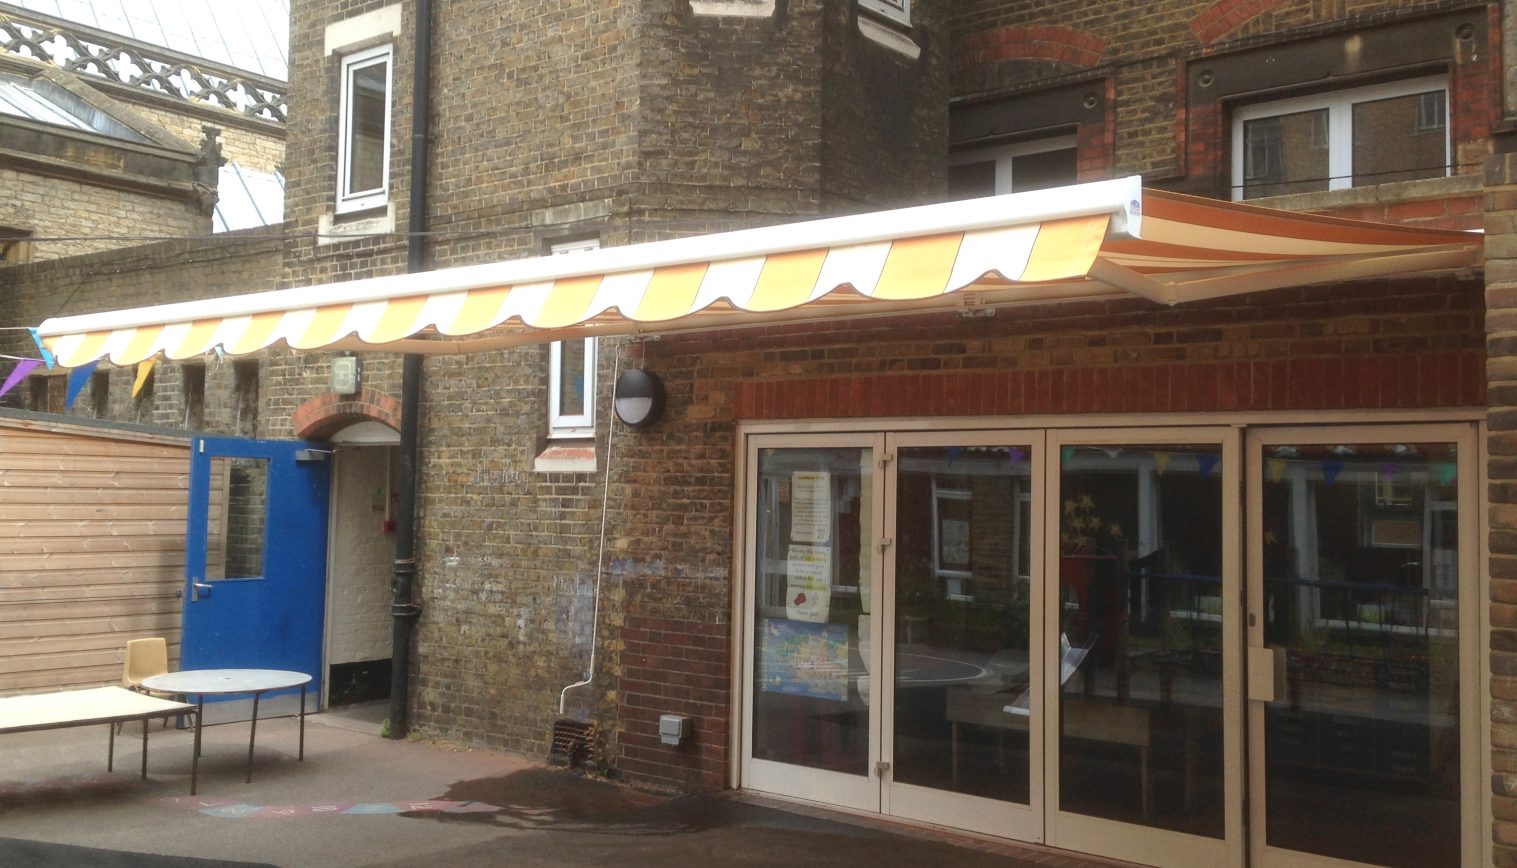 Burdett Coutts CE Primary School – Commercial Awning